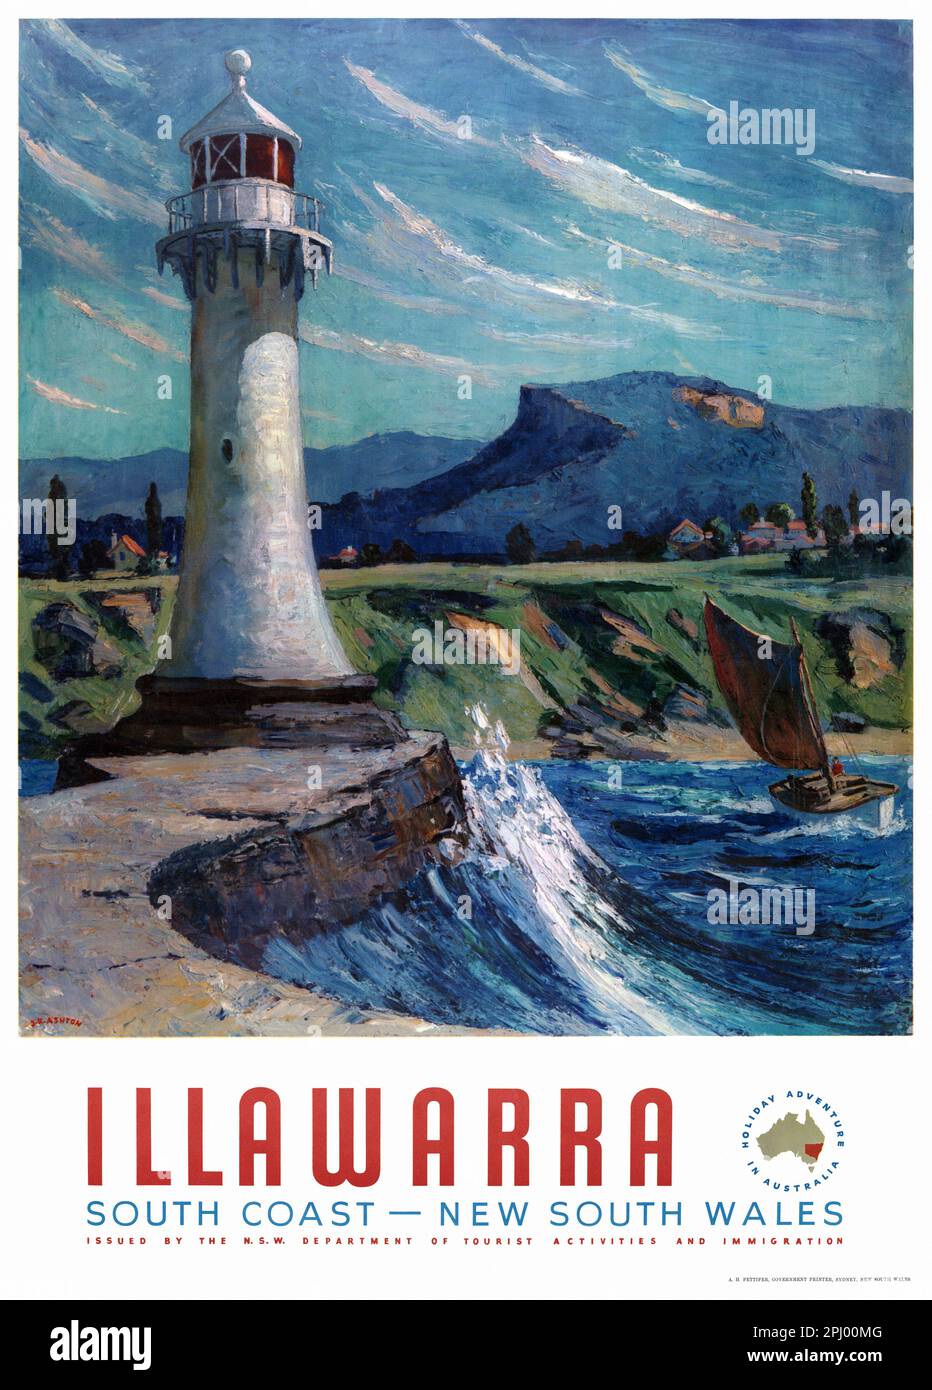 Illawarra. South Coast - New South Wales by Julian Richard Ashton (1913-2001). Poster published in the 1950s in Australia. Stock Photo